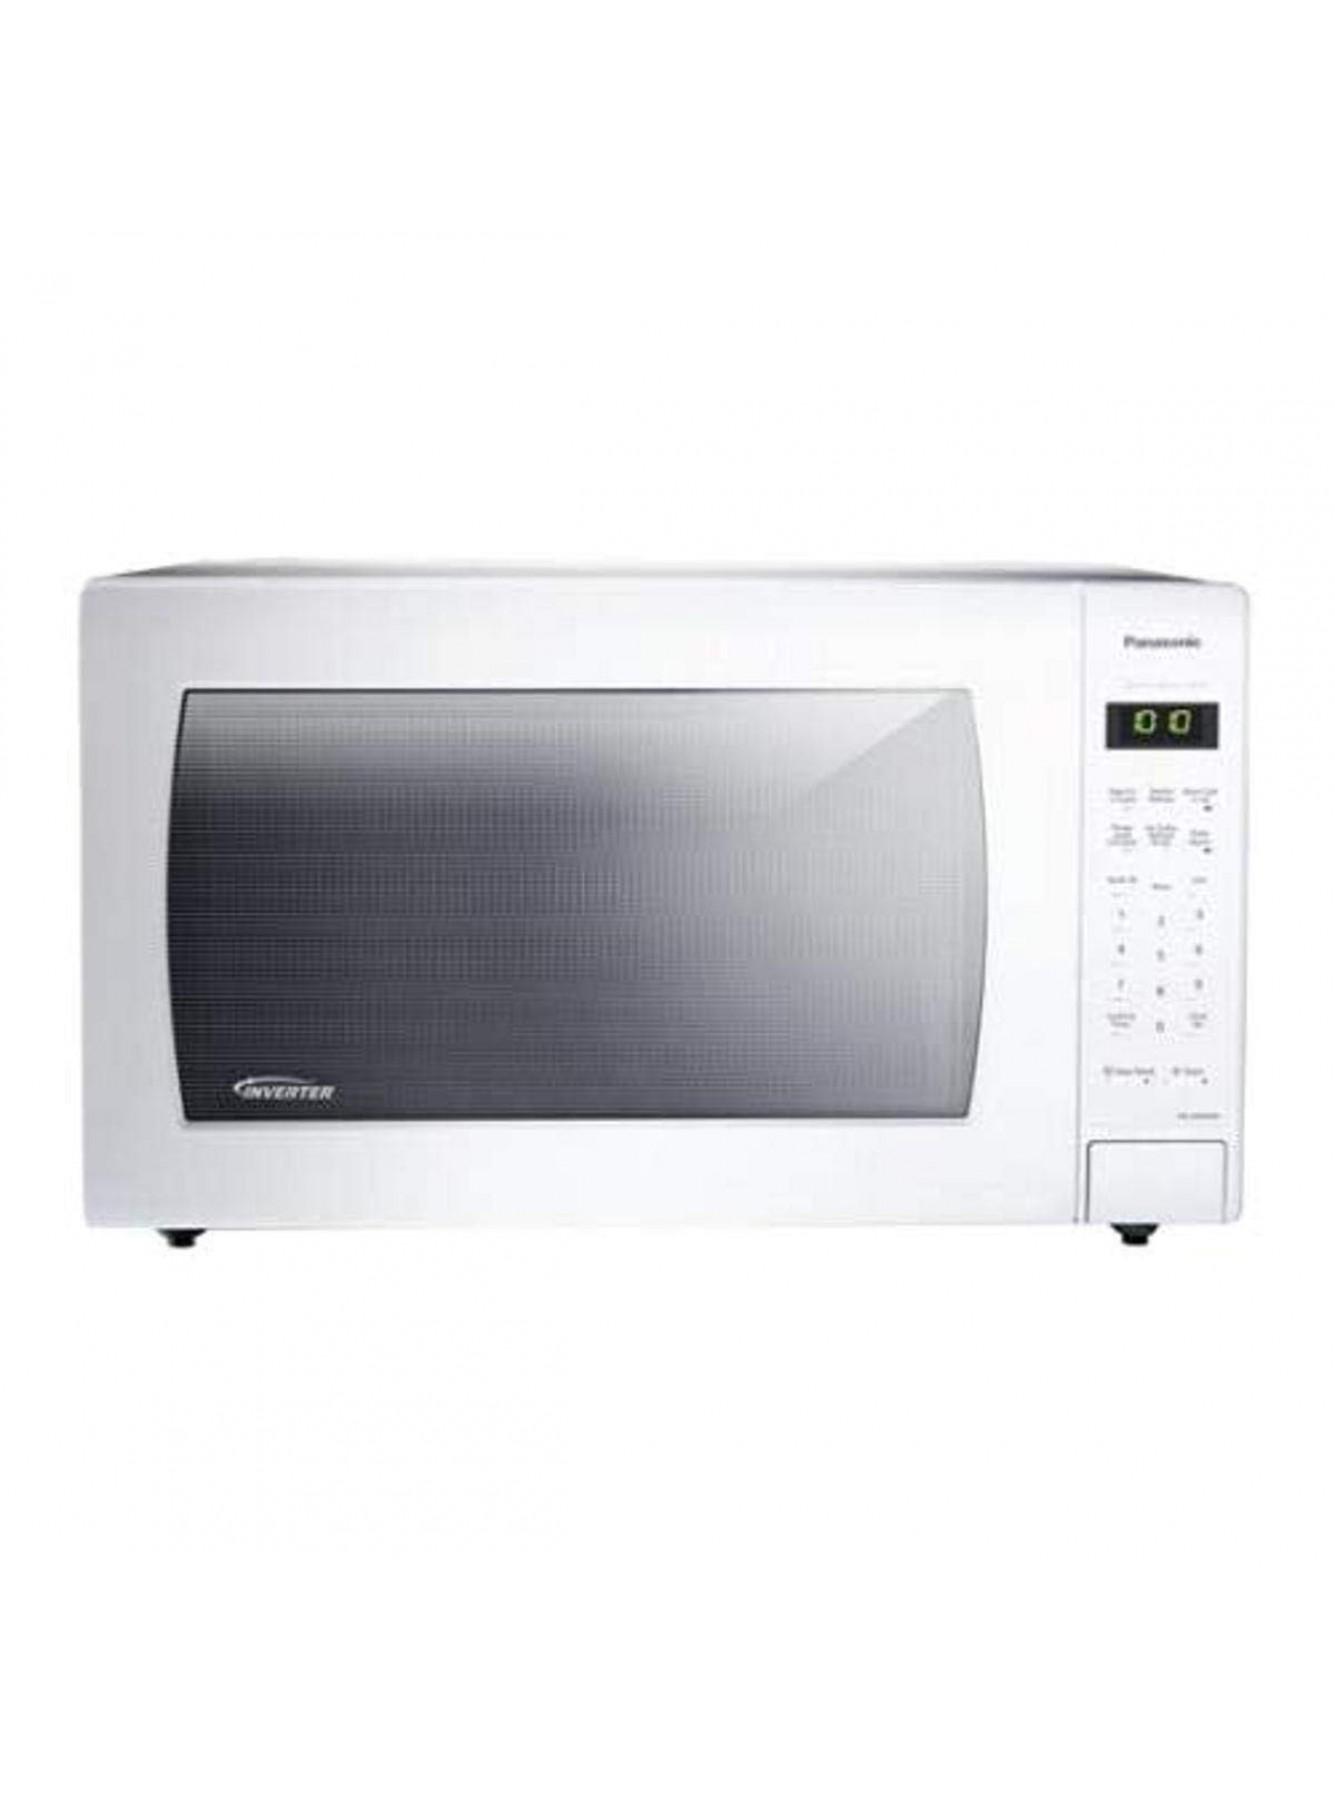 Argos Technologies 111 092 Luxury Full-Size Microwave Oven 2.2 Cu. Ft Capacity 14 Height 19-7 16 Width 23-7 8 Length B074TRBNG4